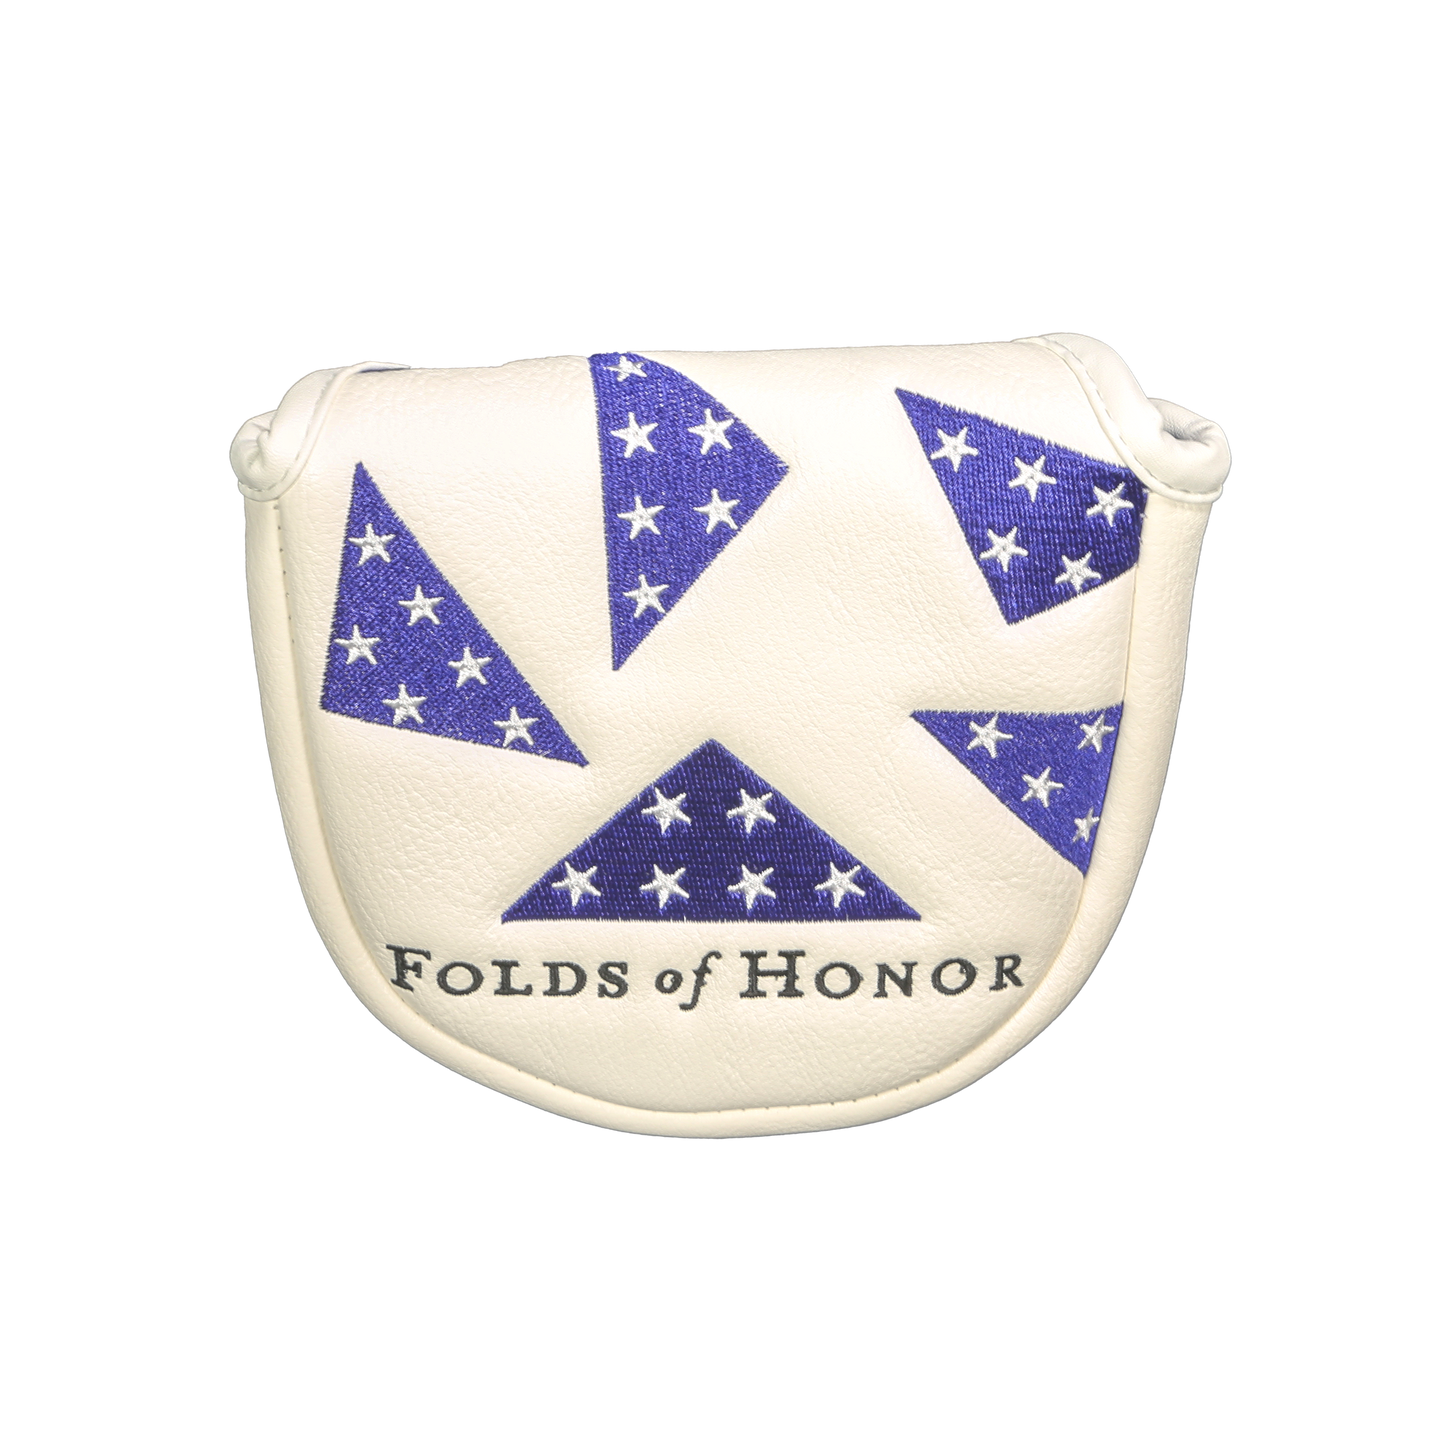 Folds of Honor Mallet Putter Cover